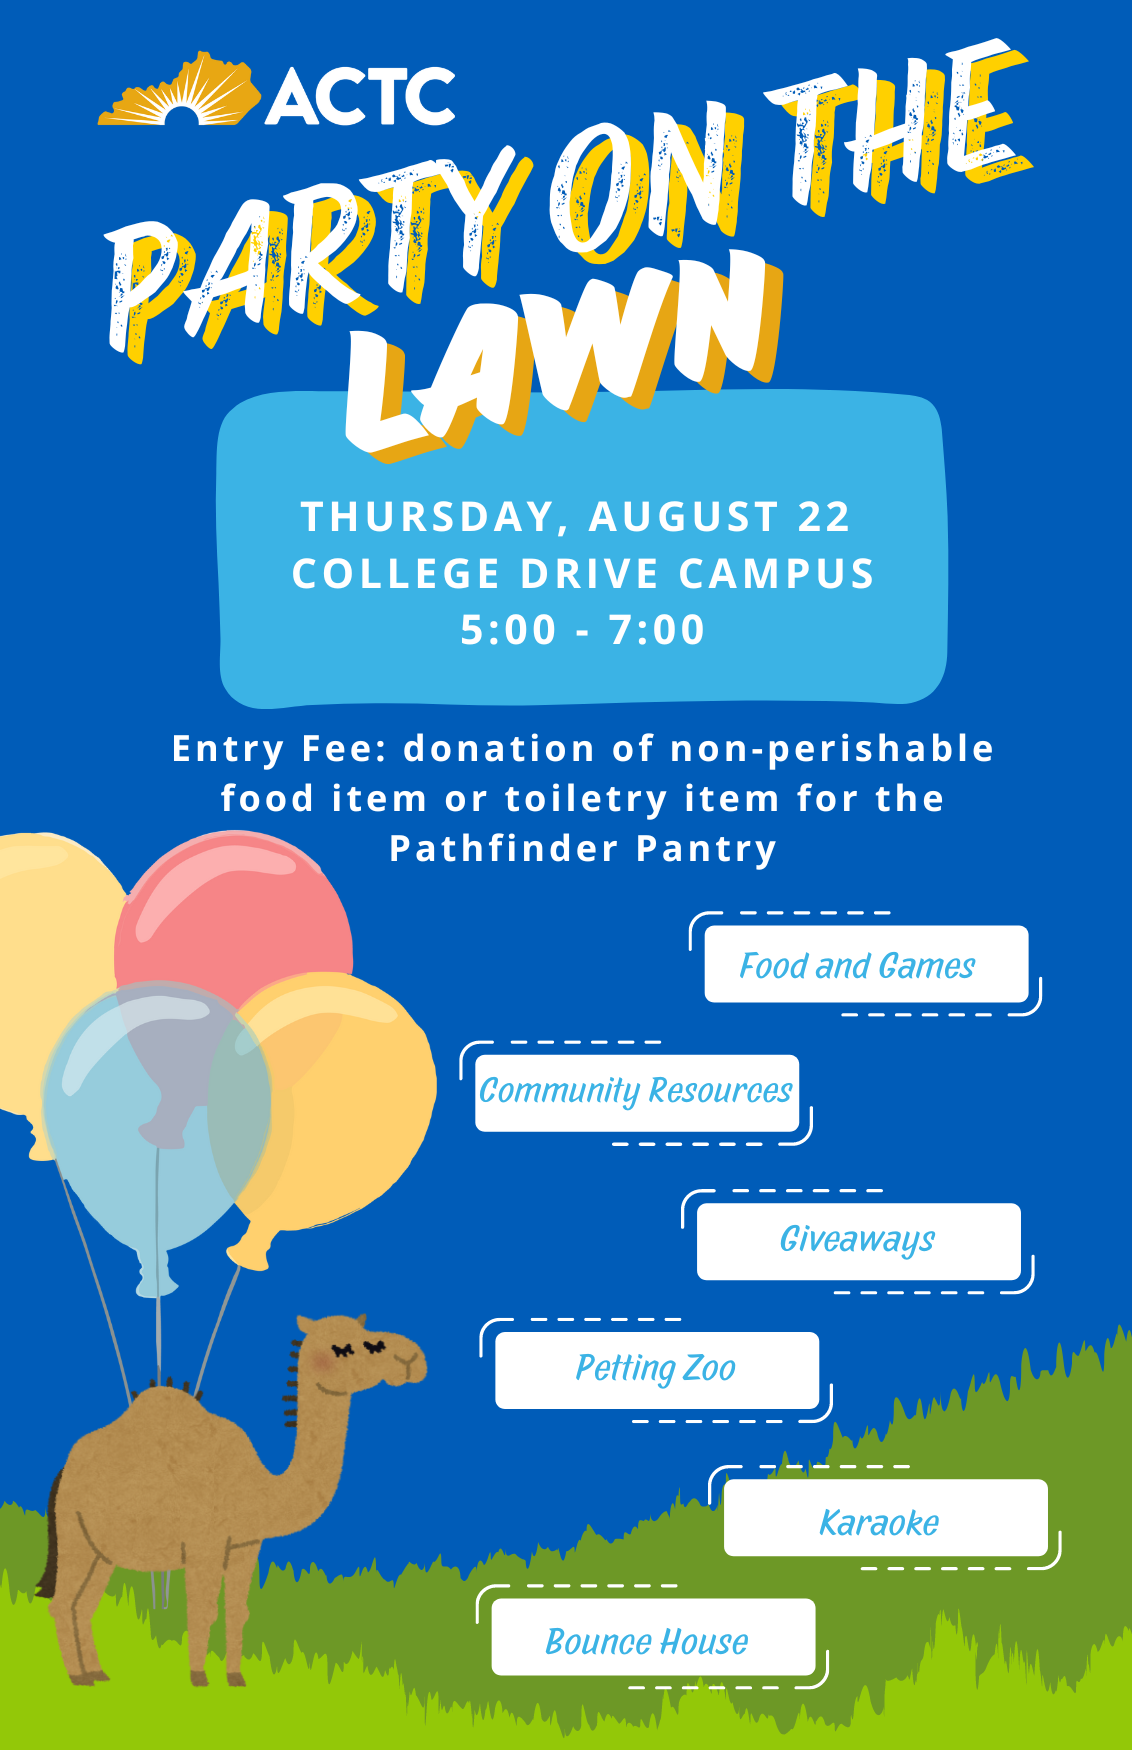 party-on-the-lawn-event-poster-bring-pantry-item-for-free-entry